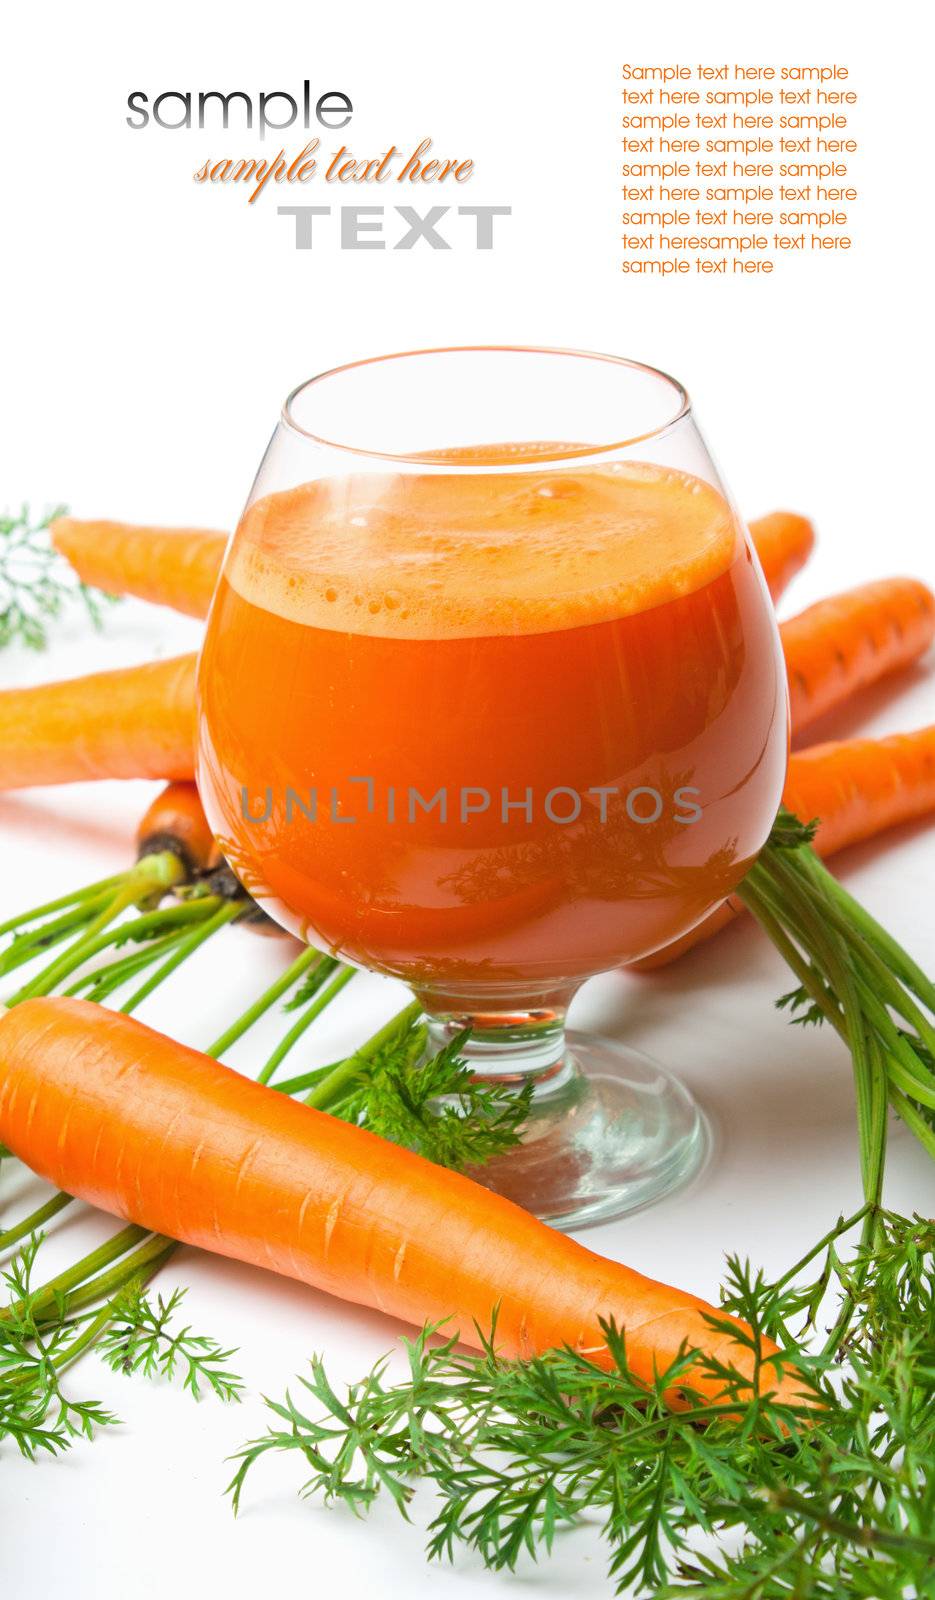 carrots and carrot juice by oleg_zhukov